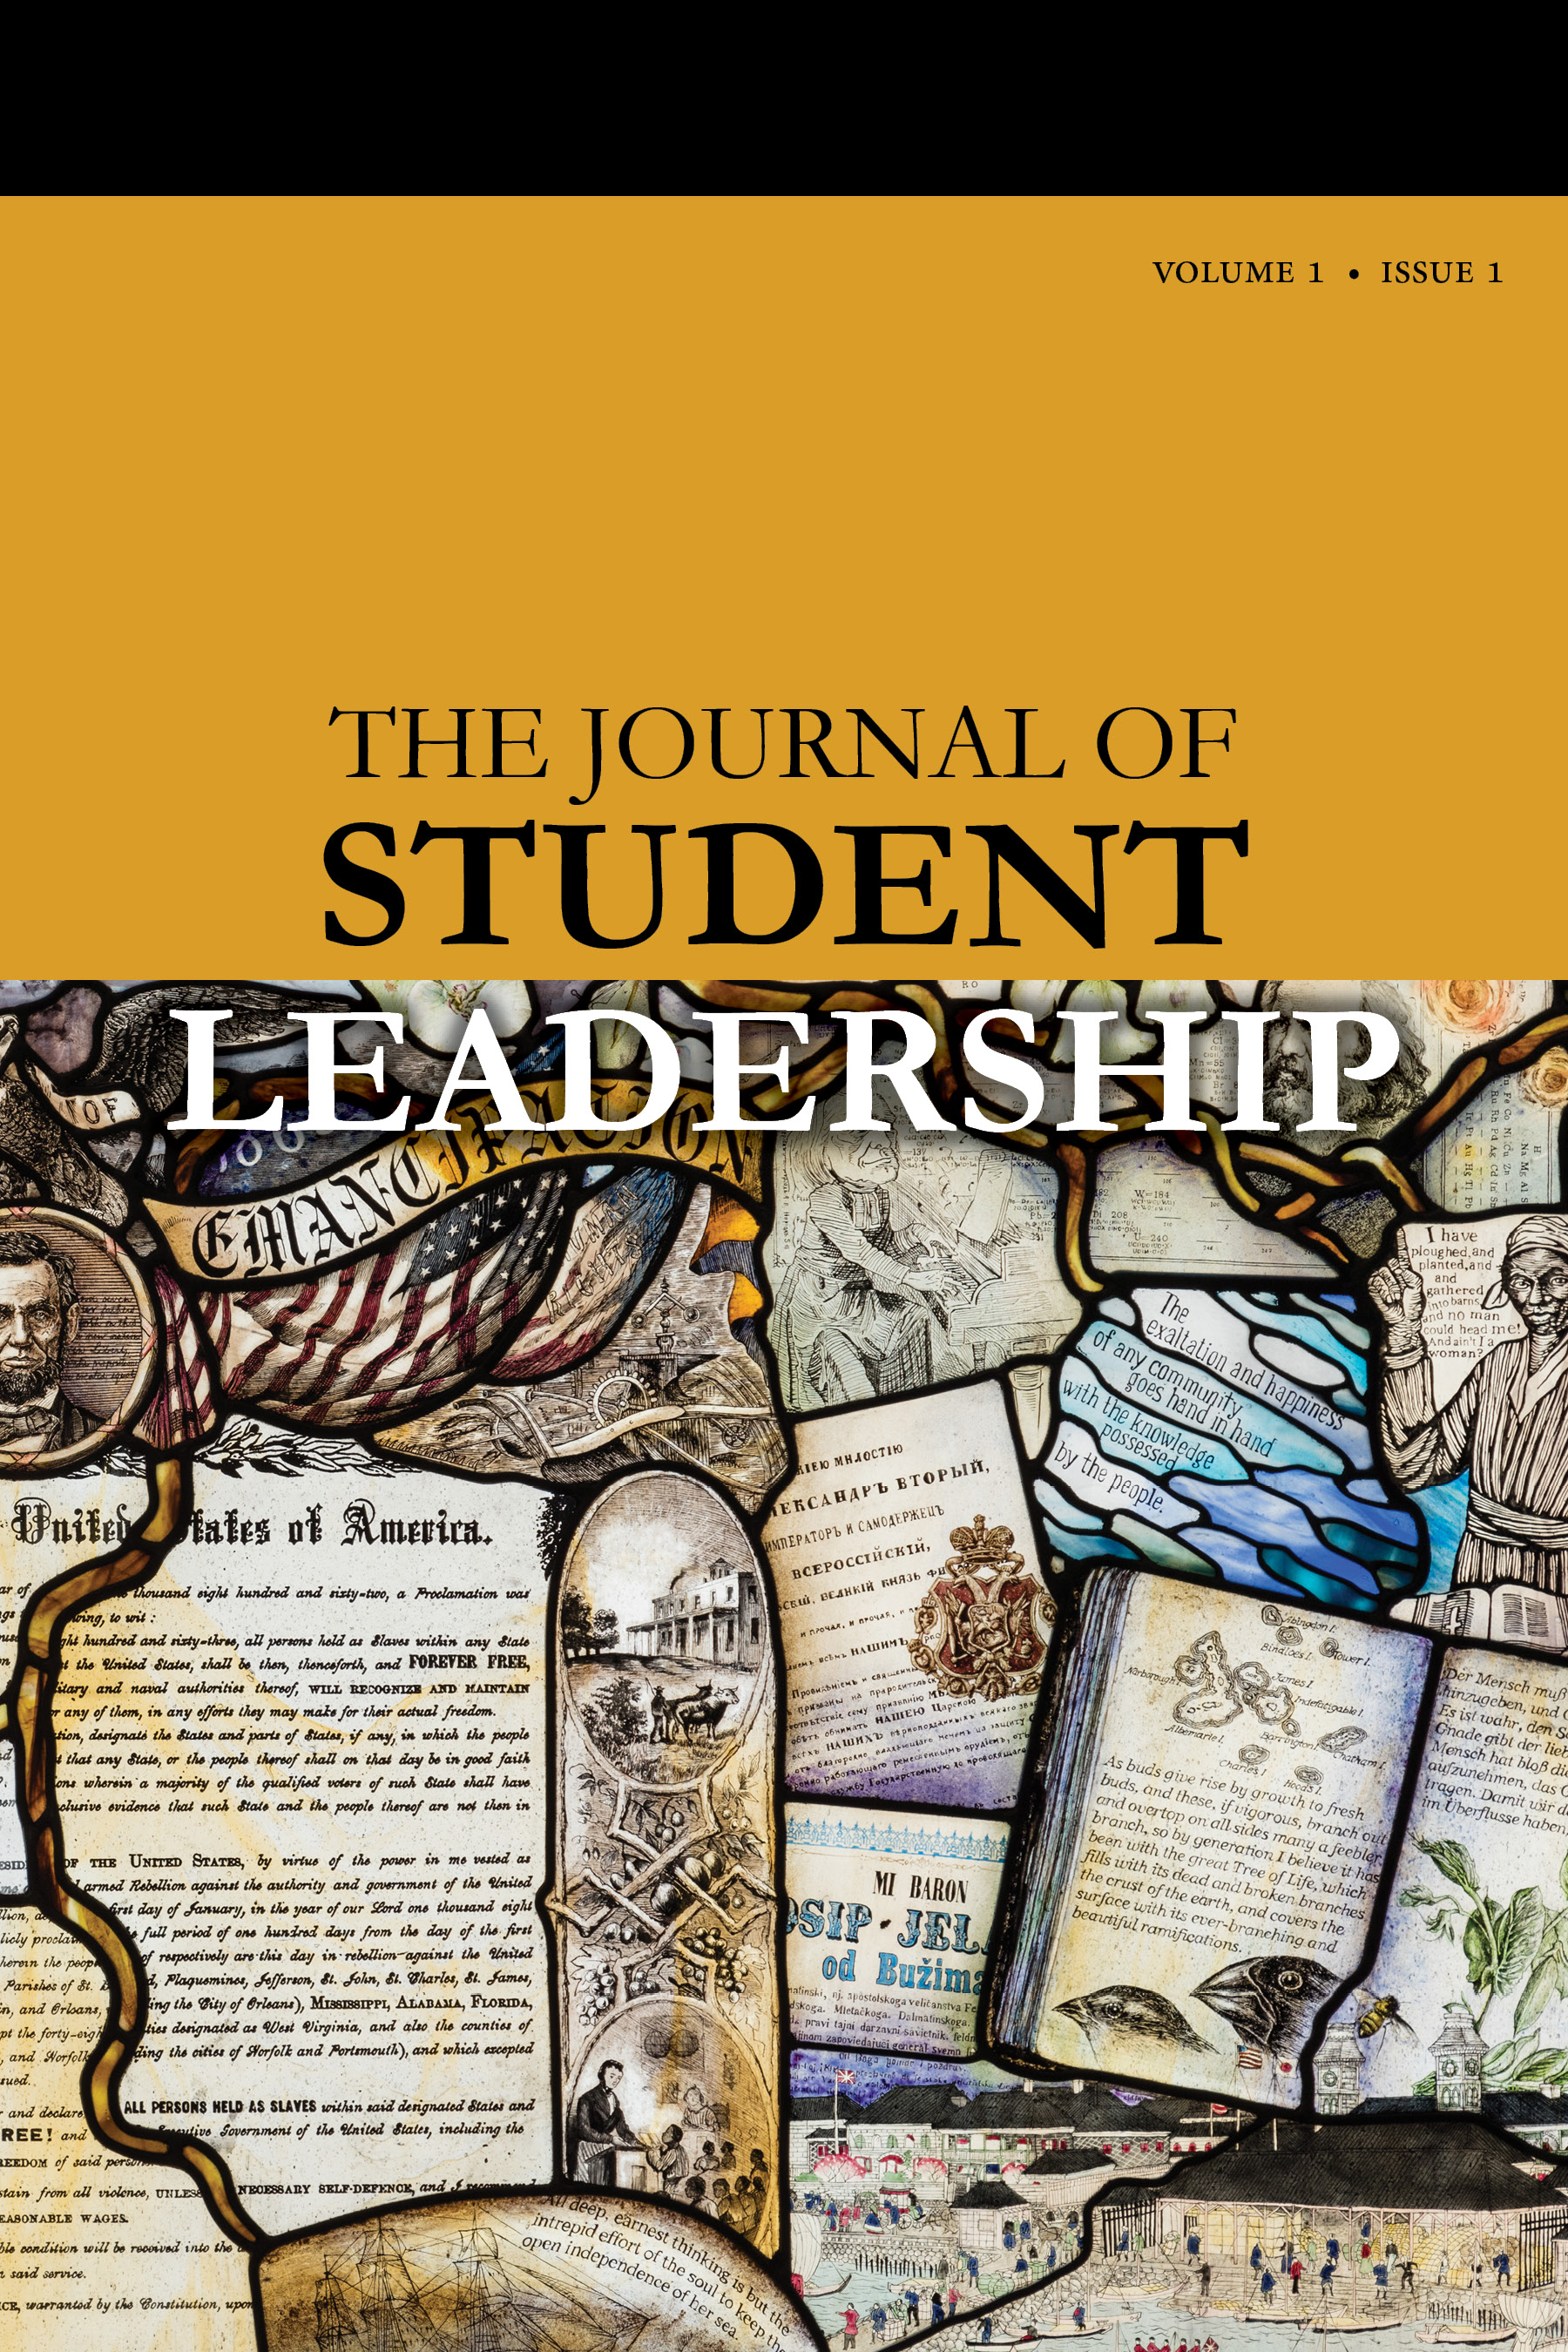 The Journal of Student Leadership